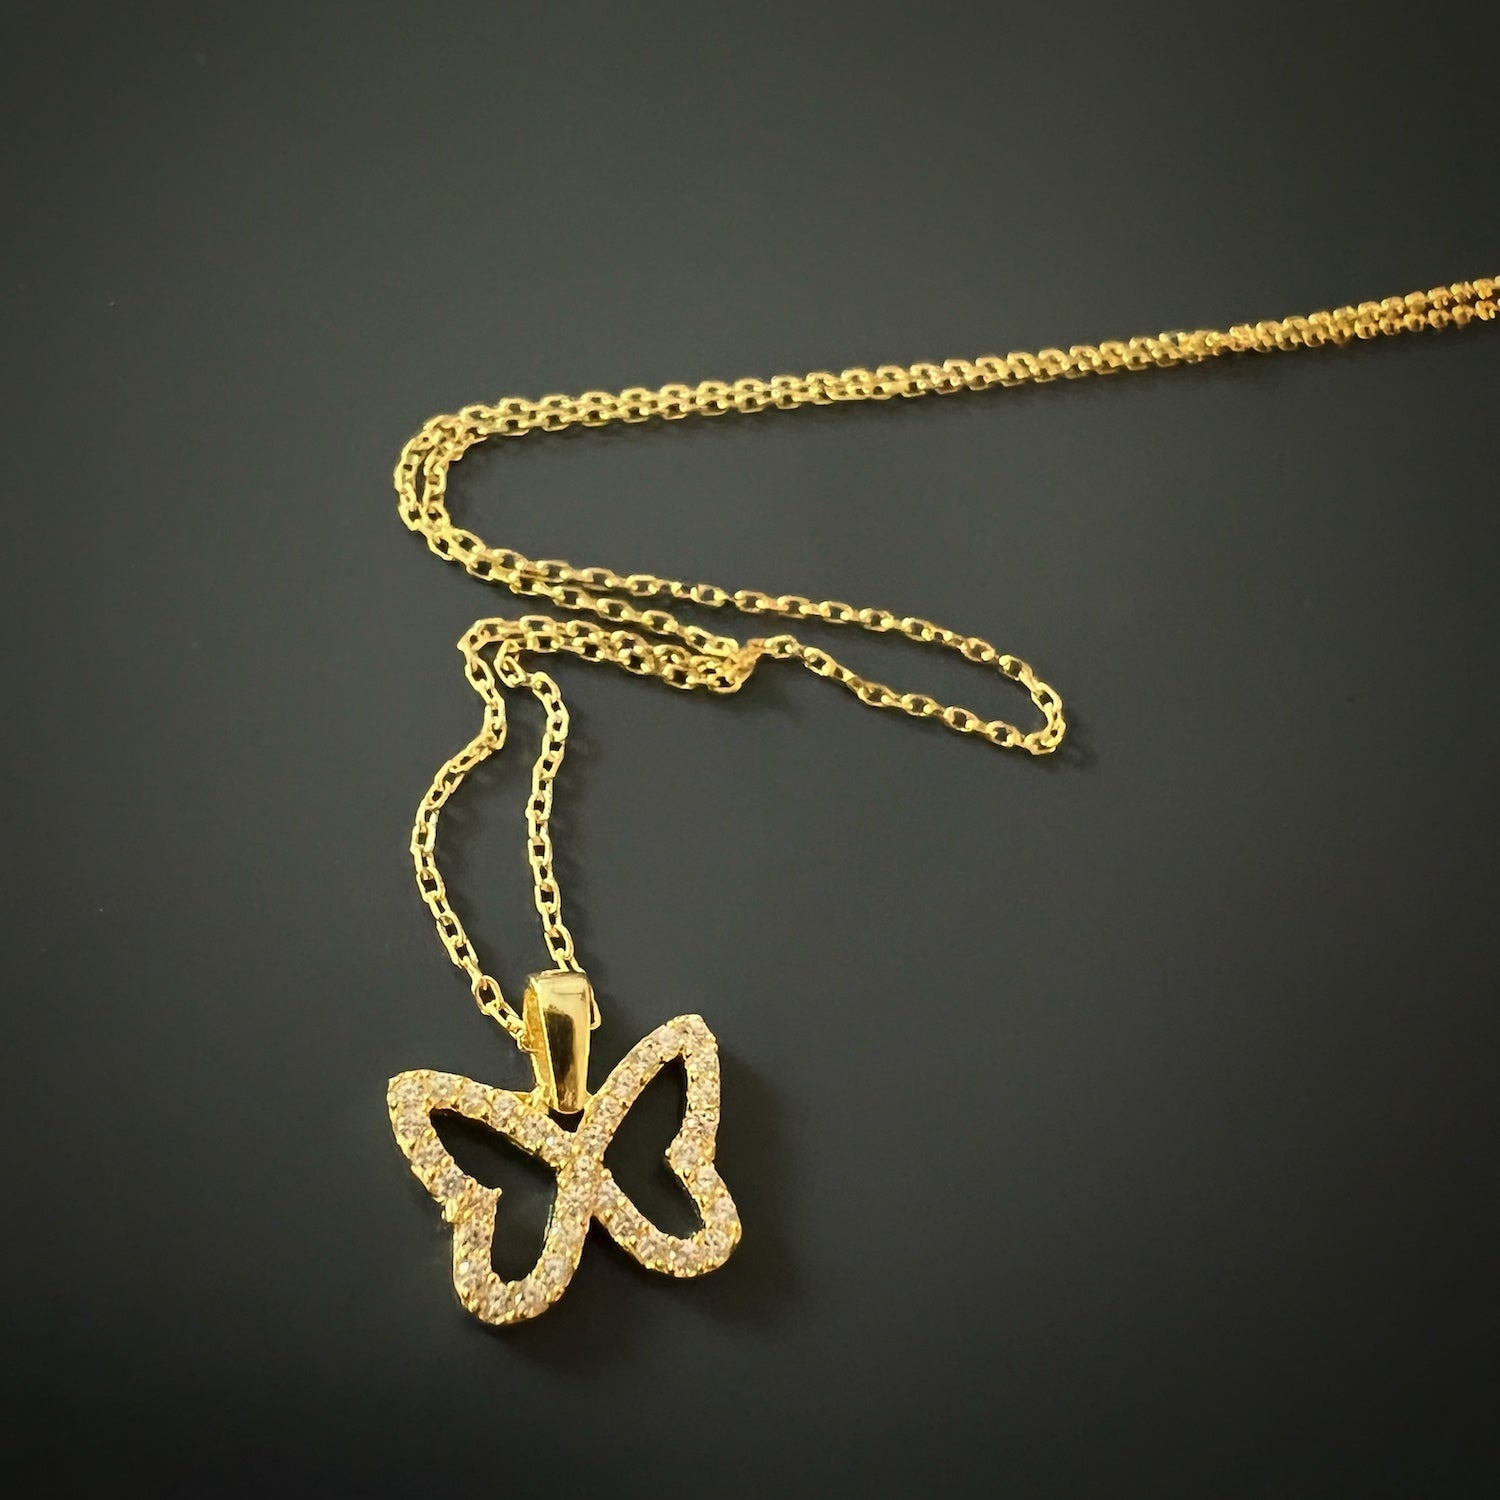 The captivating Gold Sparkly Butterfly Necklace, a stylish accessory with a touch of luxury.